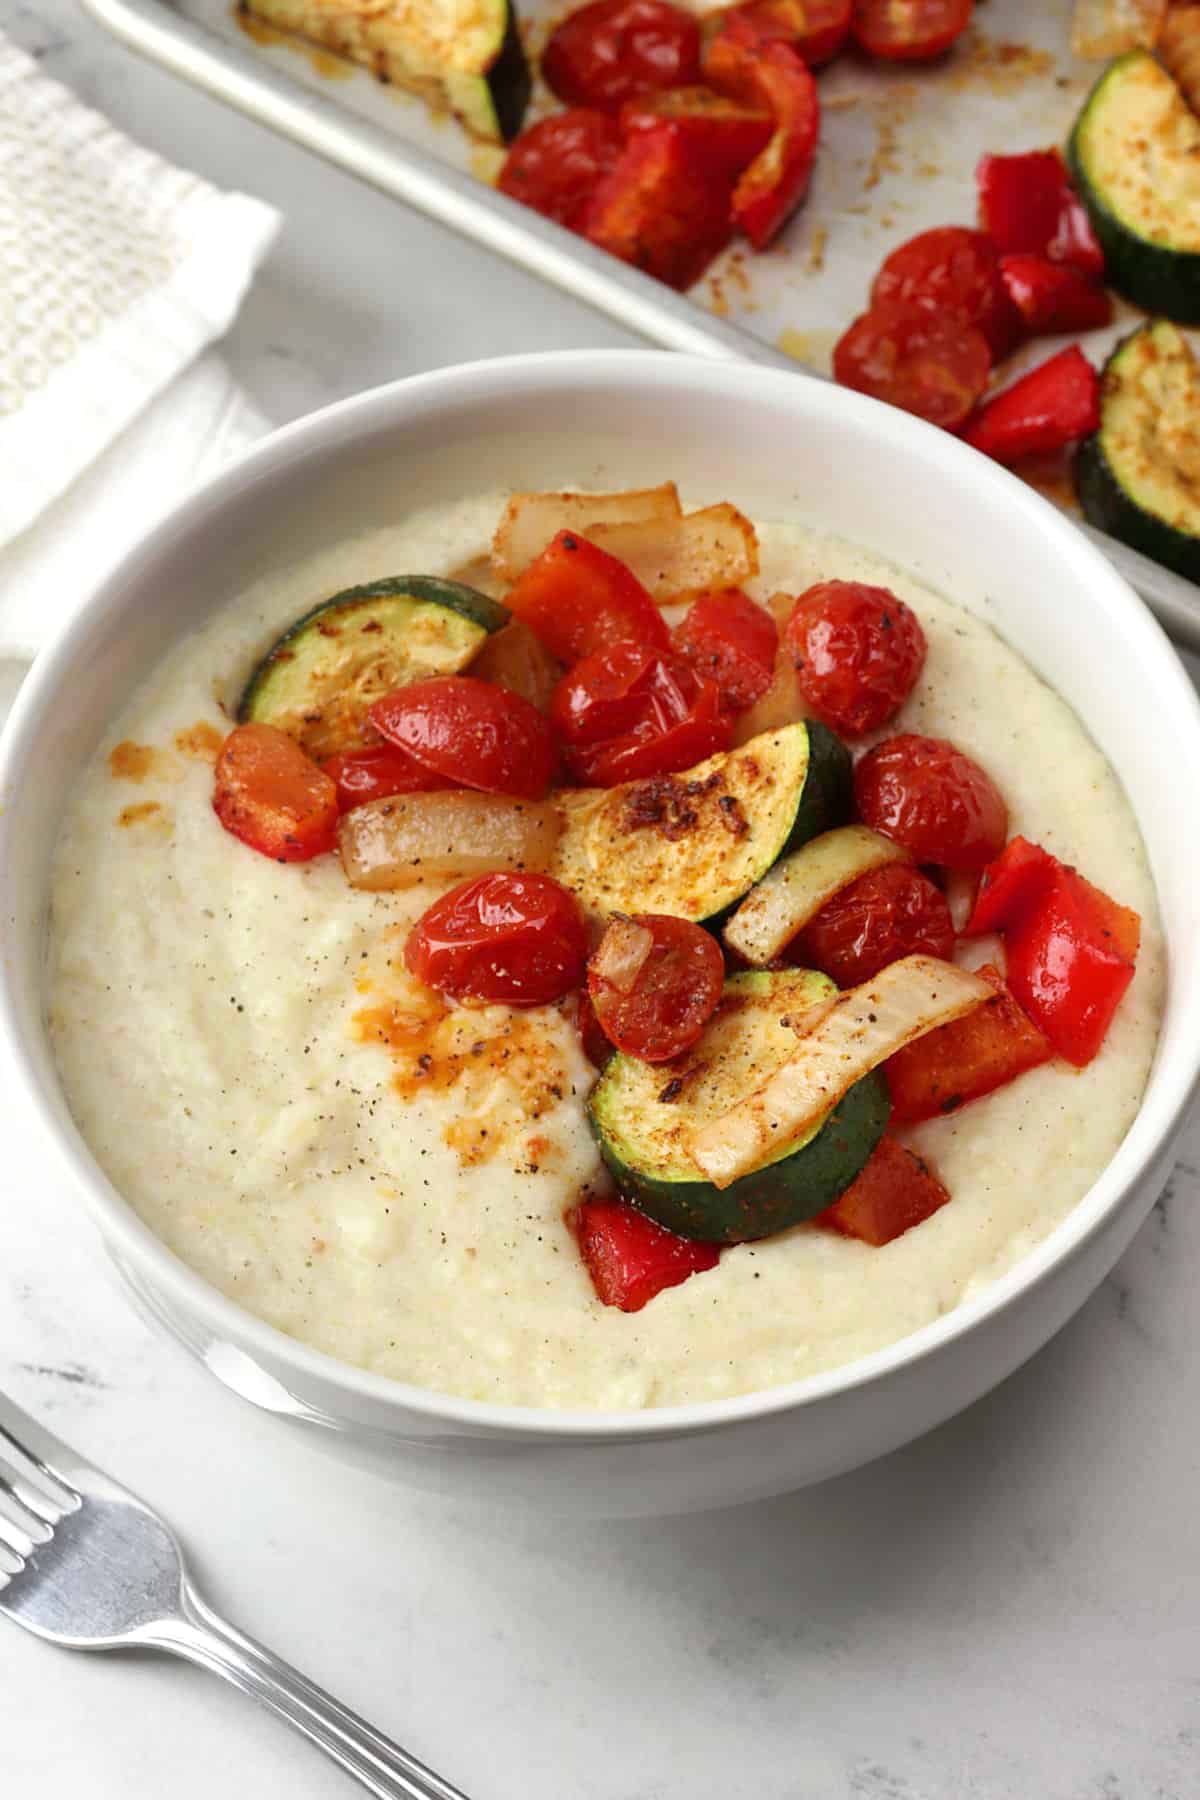 A white bowl filled with creamy grits topped with roasted vegetables.